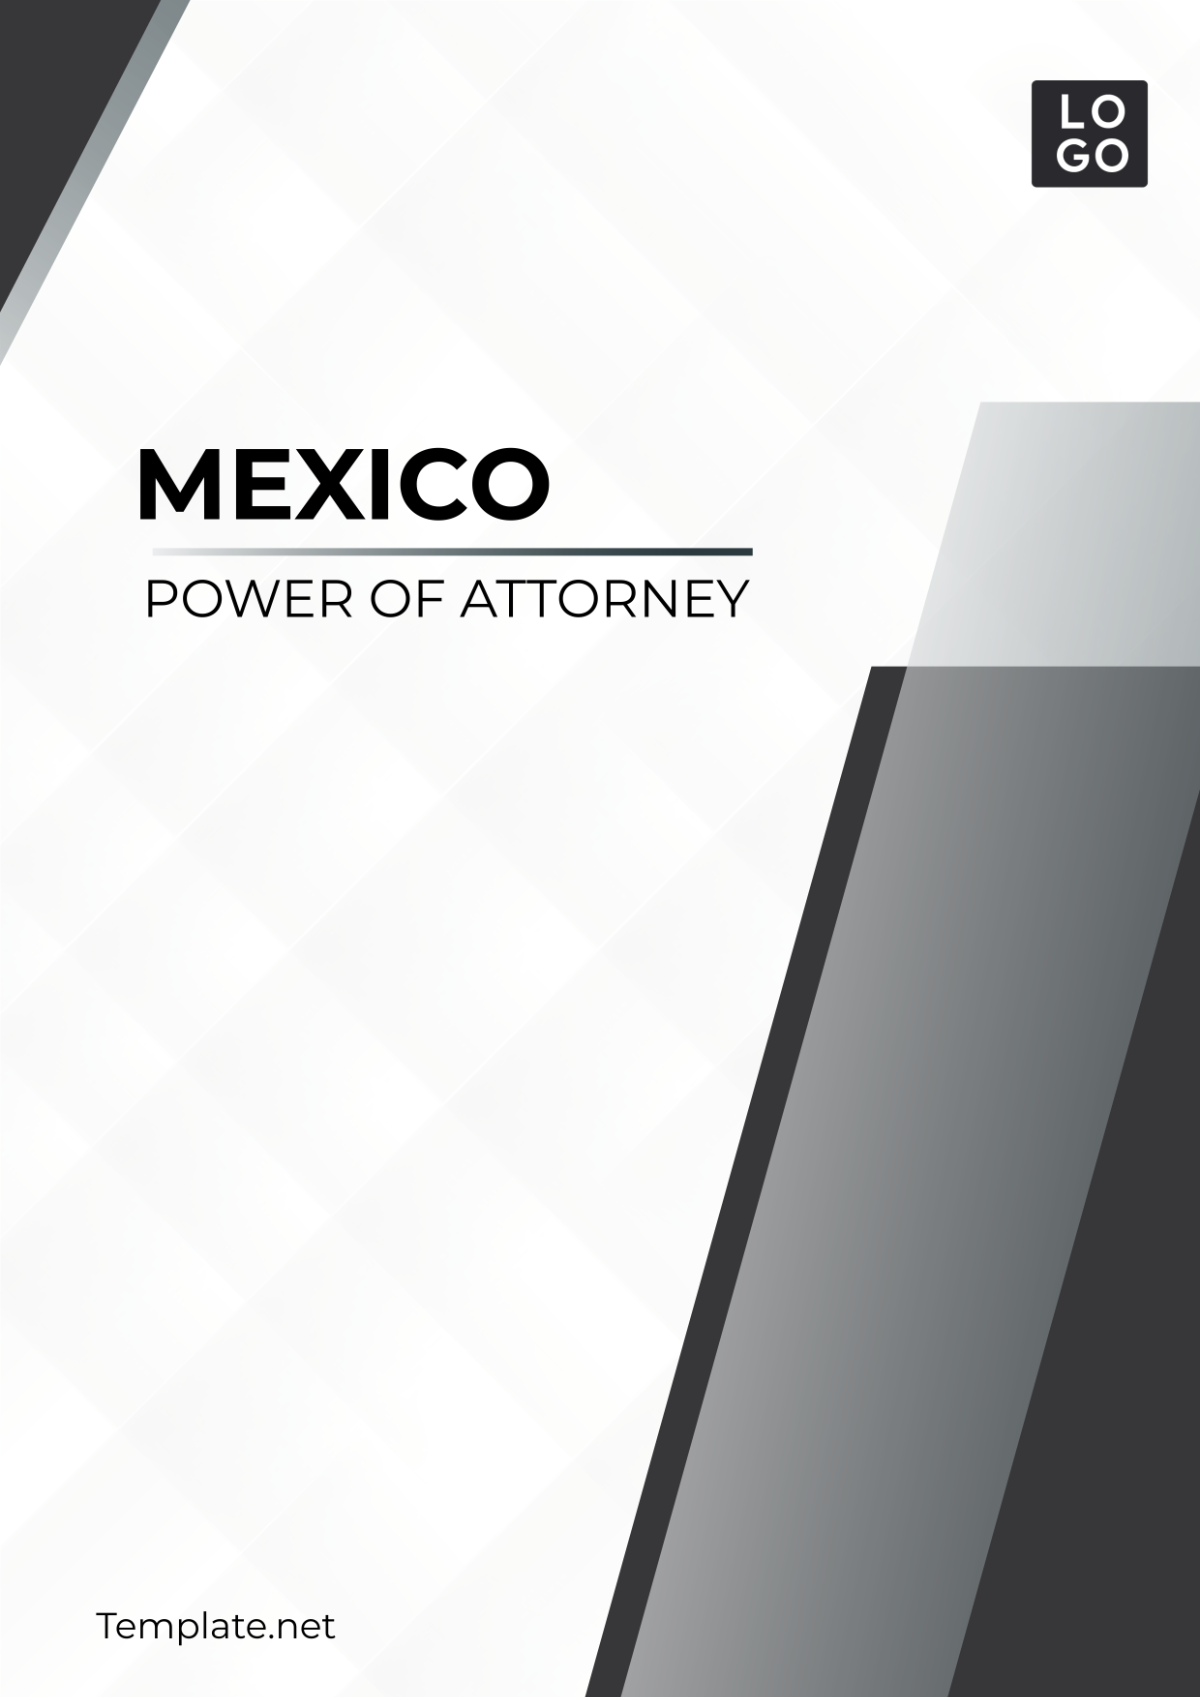 Mexico Power of Attorney Template